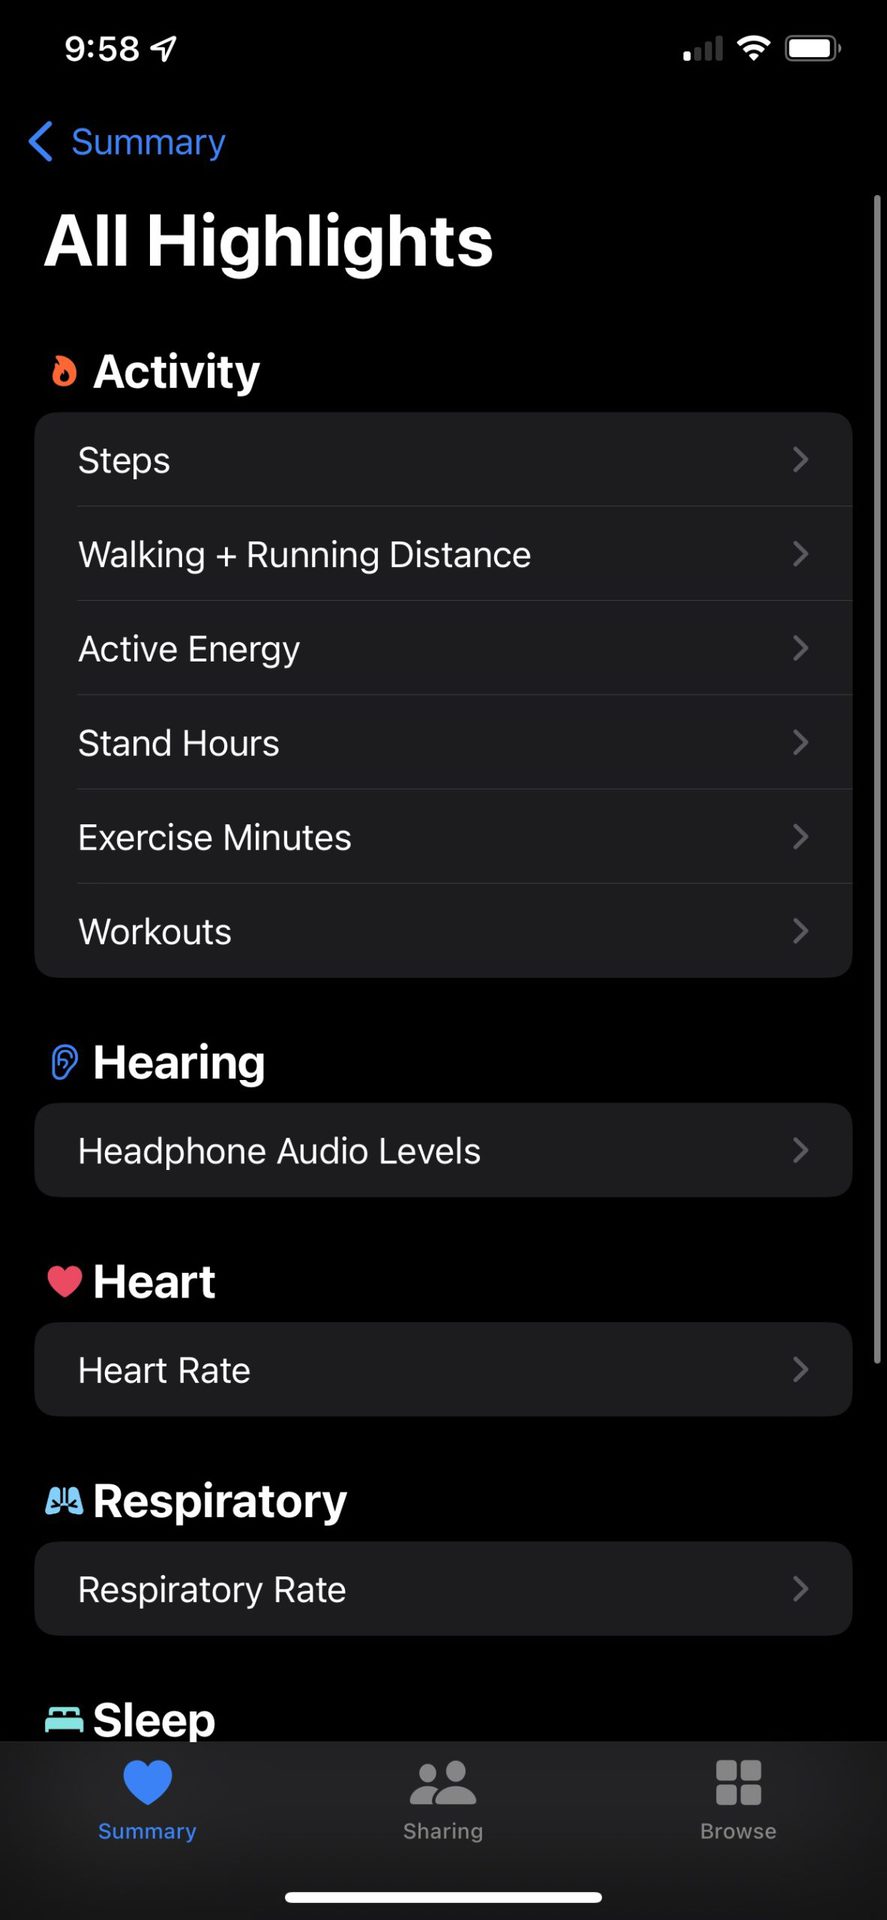 A screen shot of the All Highlights landing page on Apple's Health app shows a users data highlights including activity, heart, and respiratory data, and more.